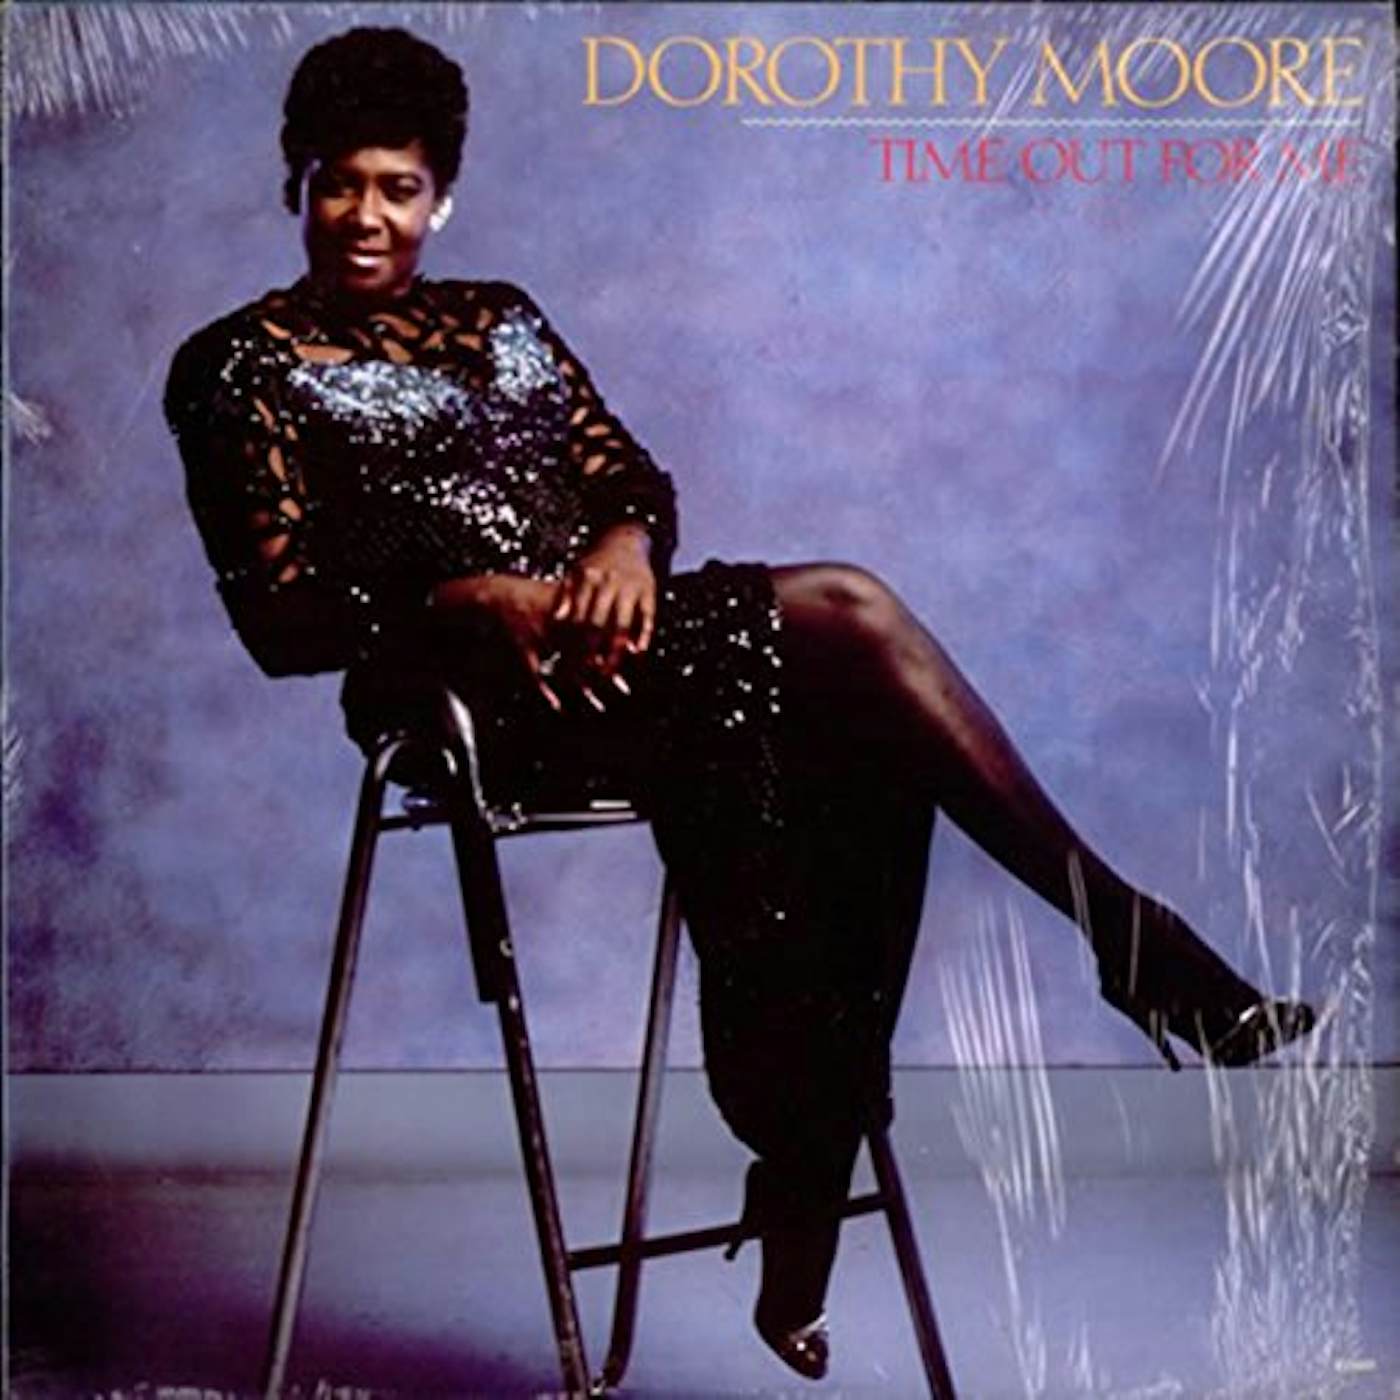 Dorothy Moore Time Out For Me Vinyl Record